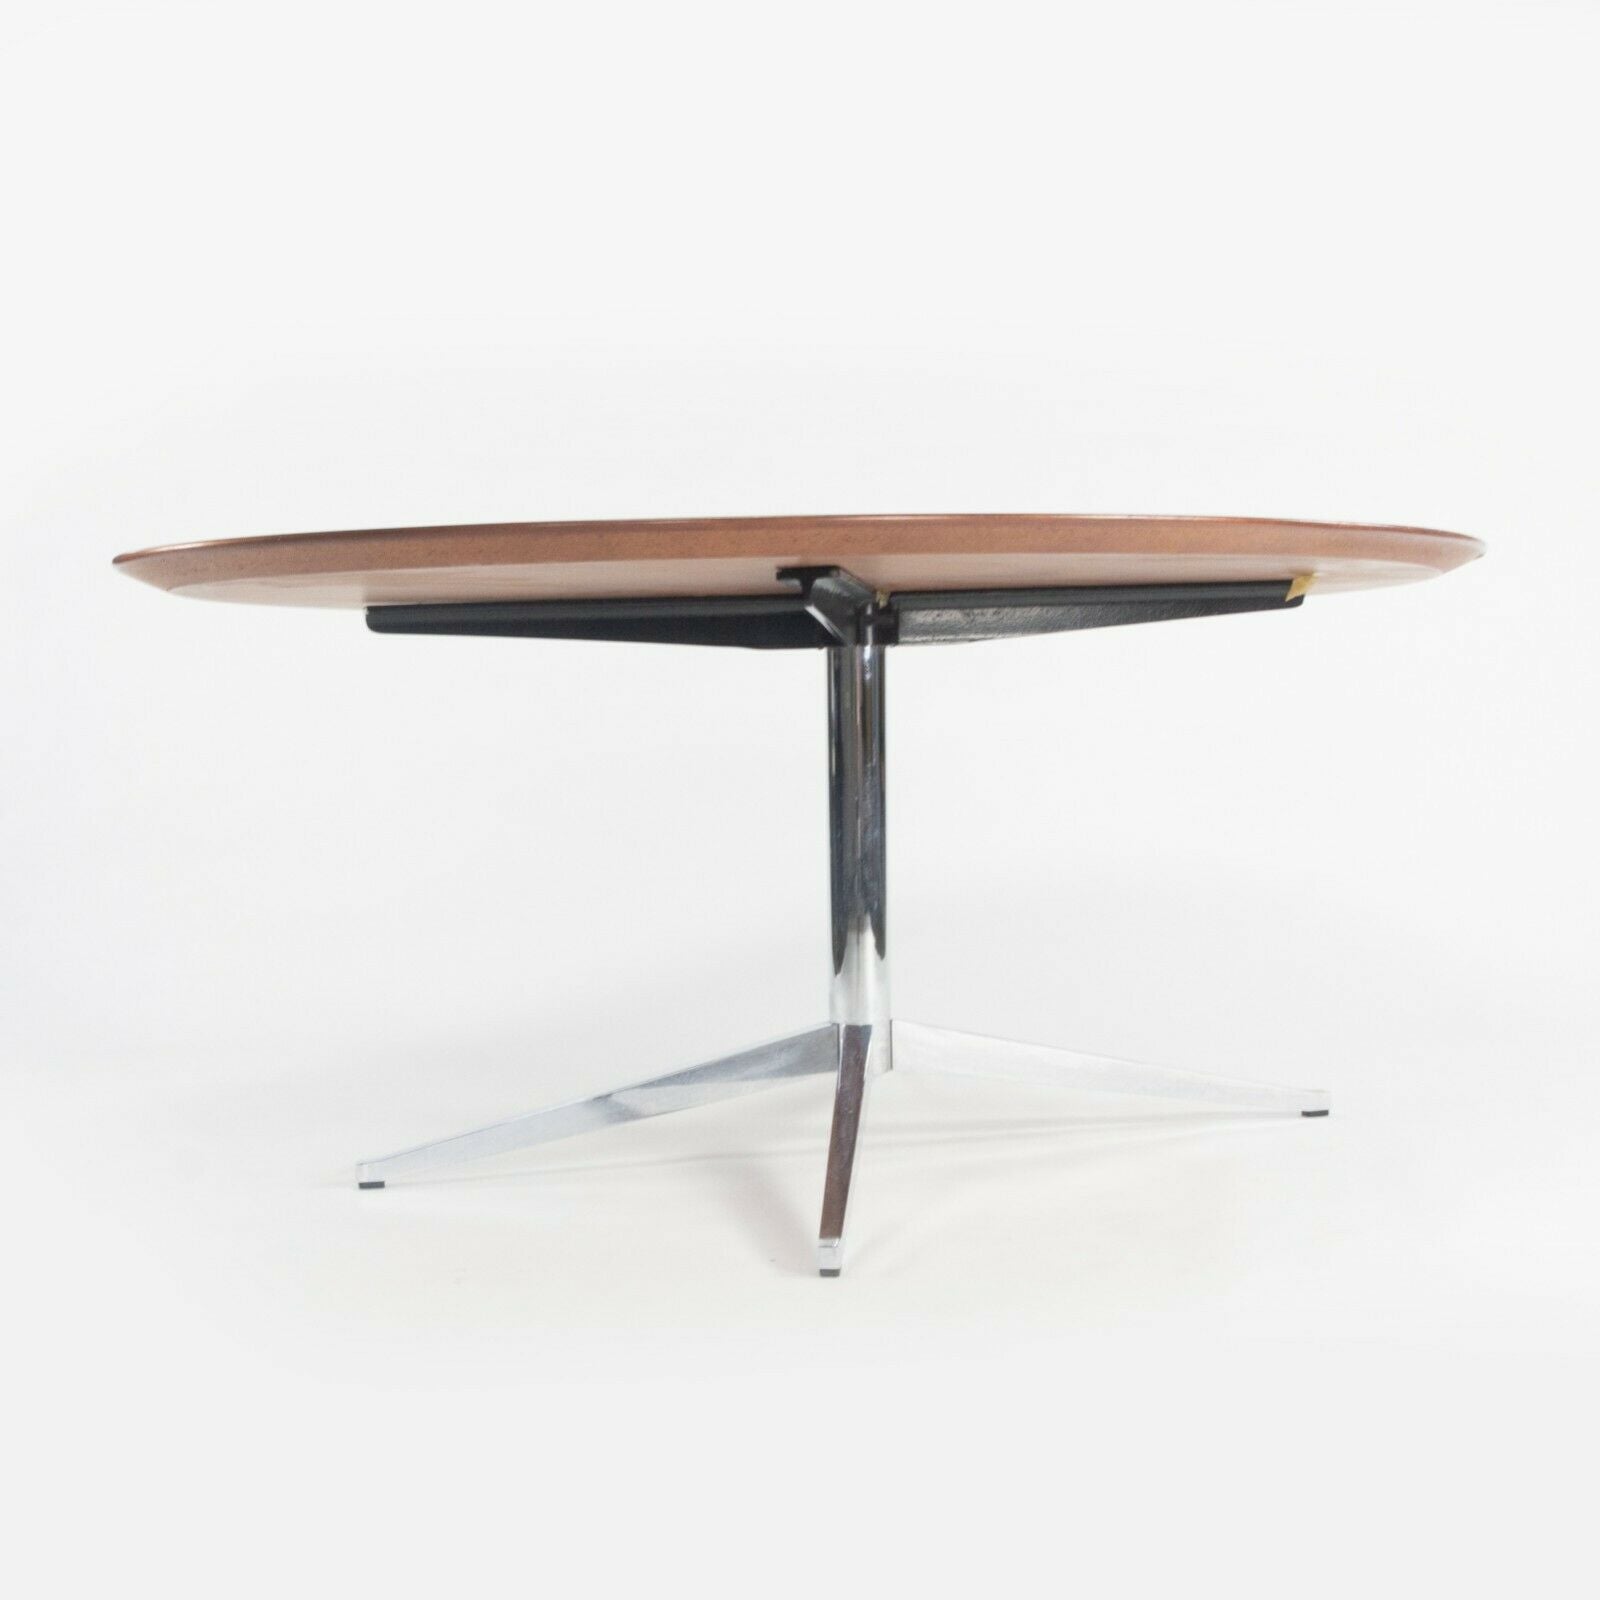 SOLD 1964 Florence Knoll 78 Inch Oval Conference Dining Table in Brazilian Rosewood